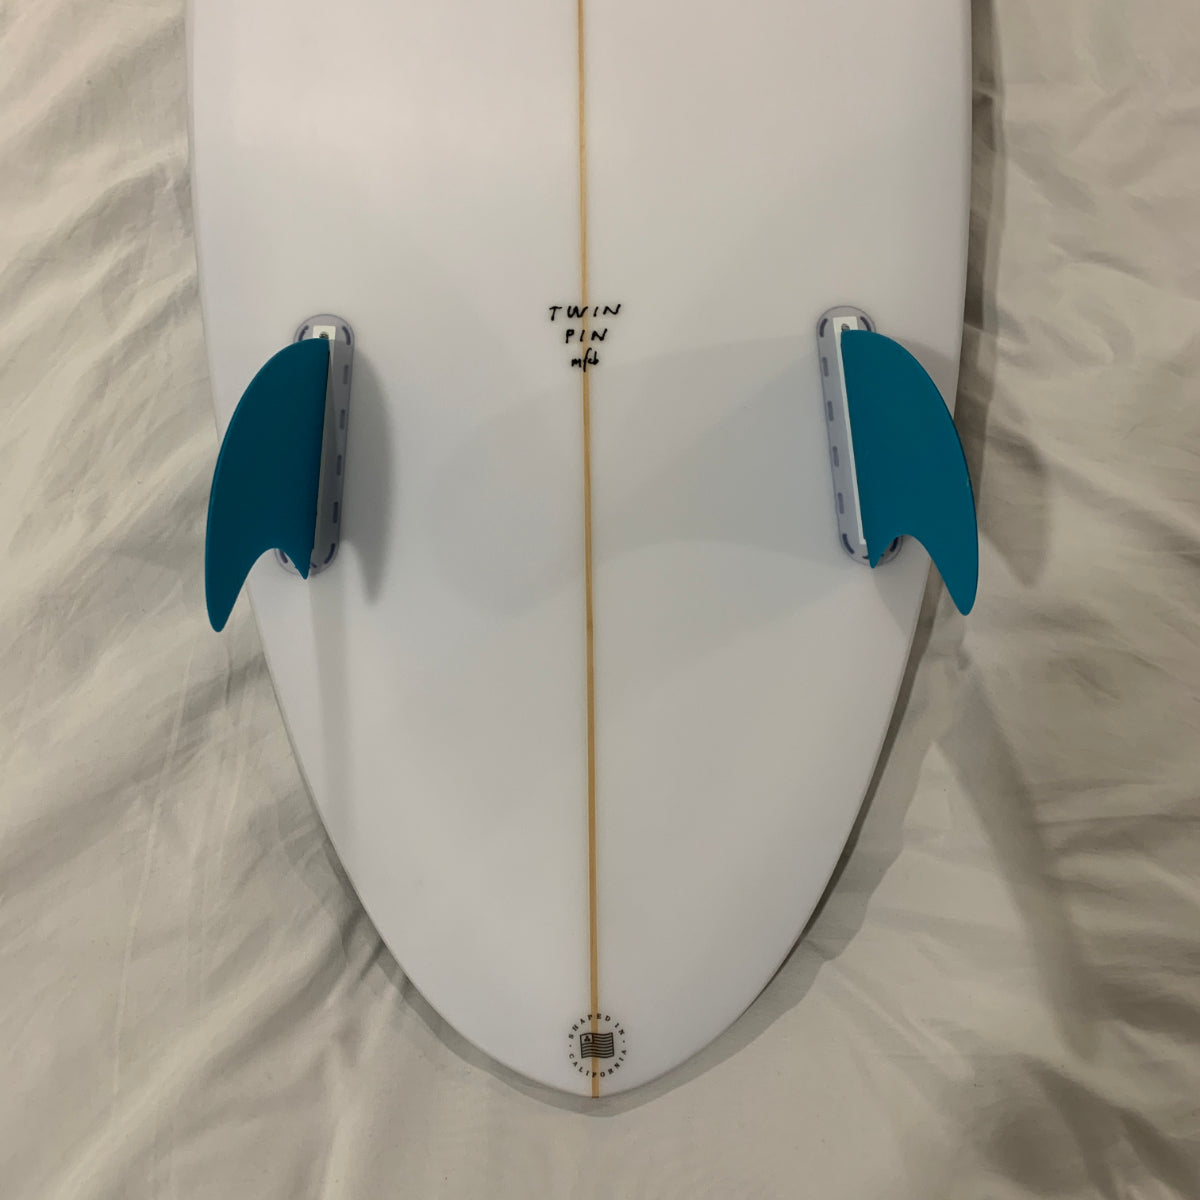 
                  
                    Channel Islands - Twin Pin 6'3 - Futures Fins - USED**
                  
                